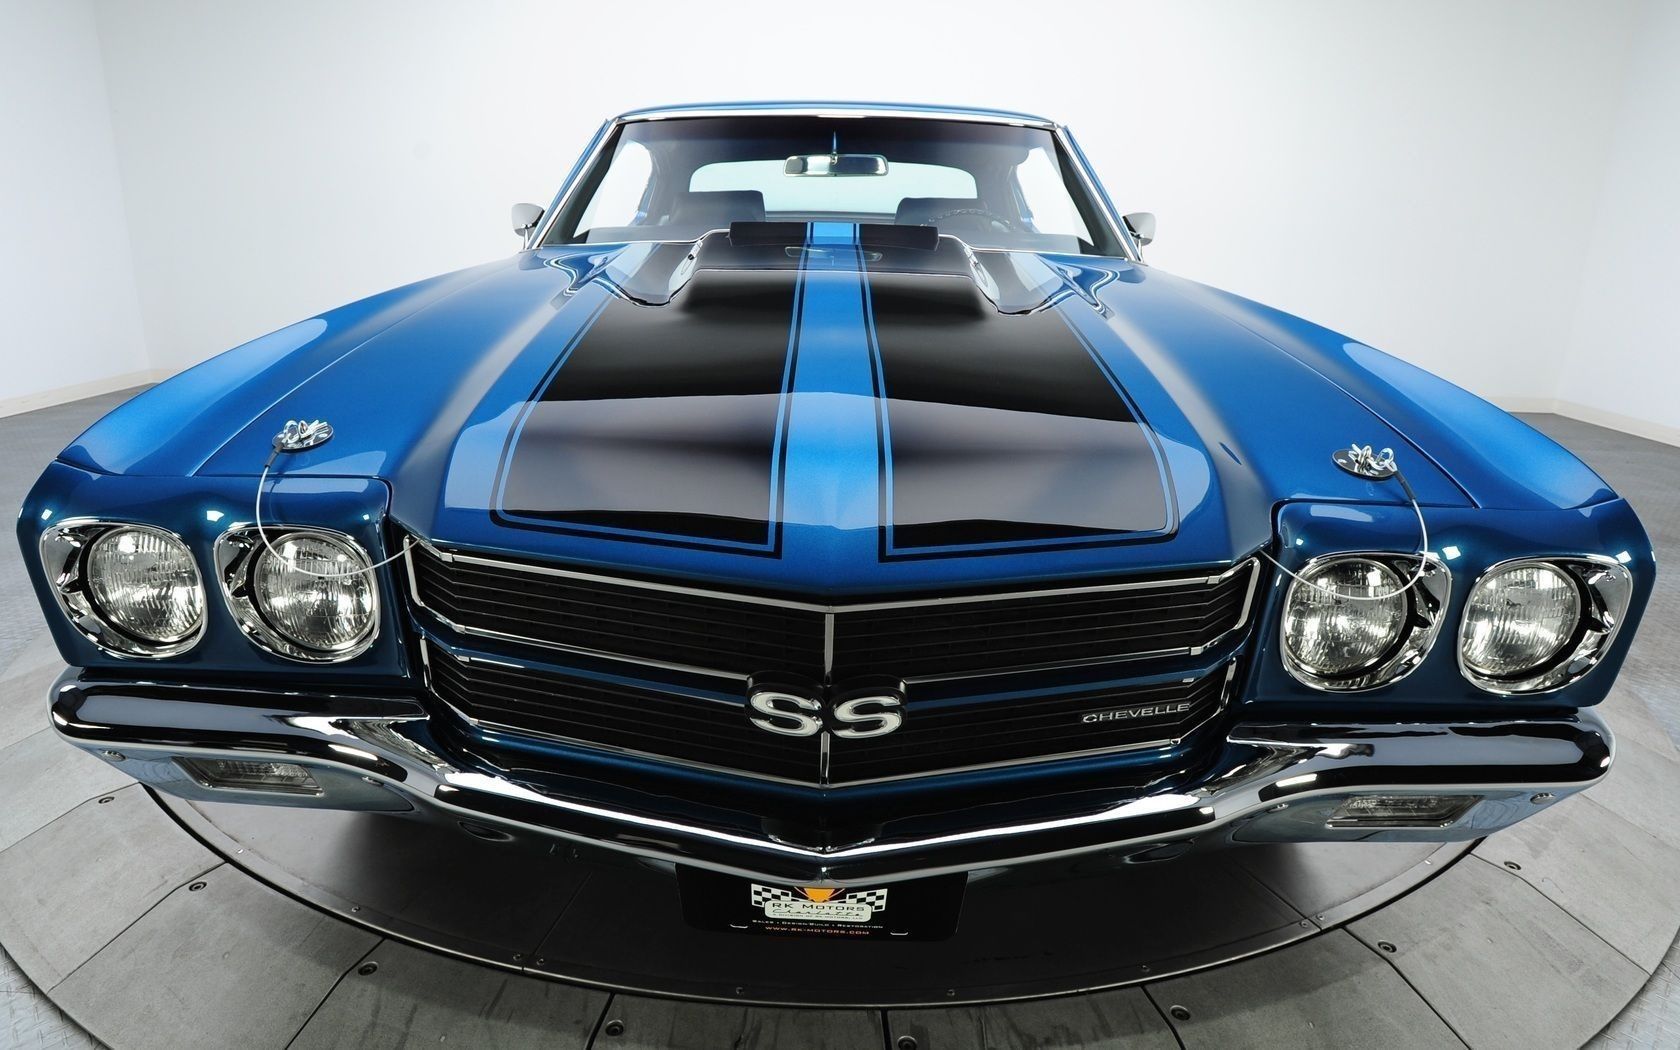 Chevy Muscle Car Wallpaper Download Resolution 4K